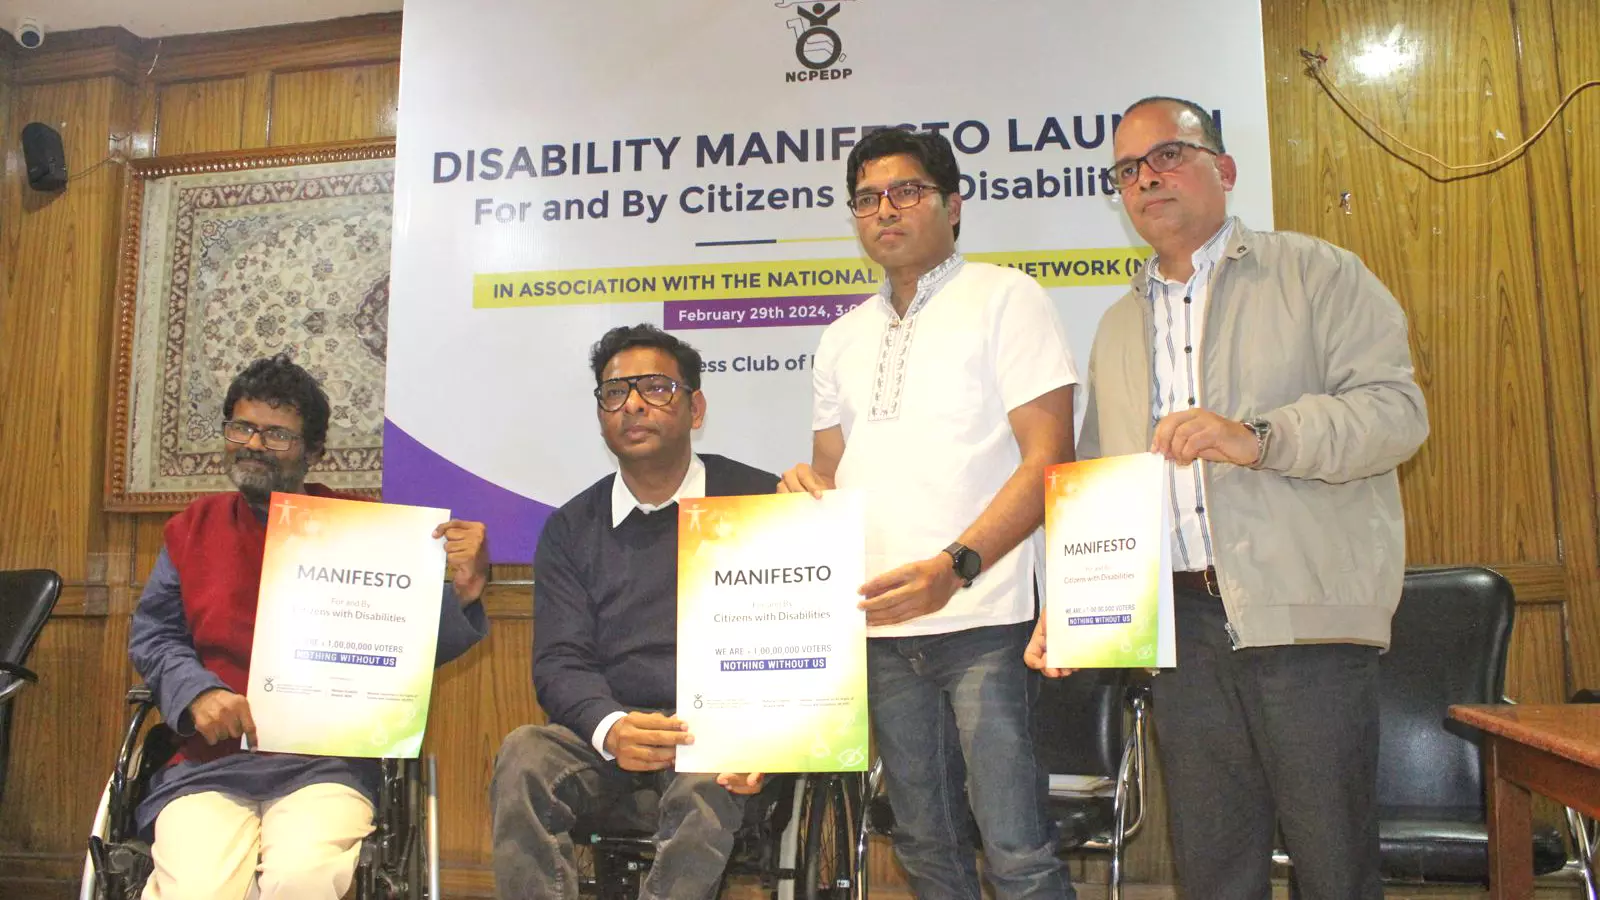 The manifesto, a first-of-its-kind initiative in the country, was unveiled on Thursday in New Delhi.